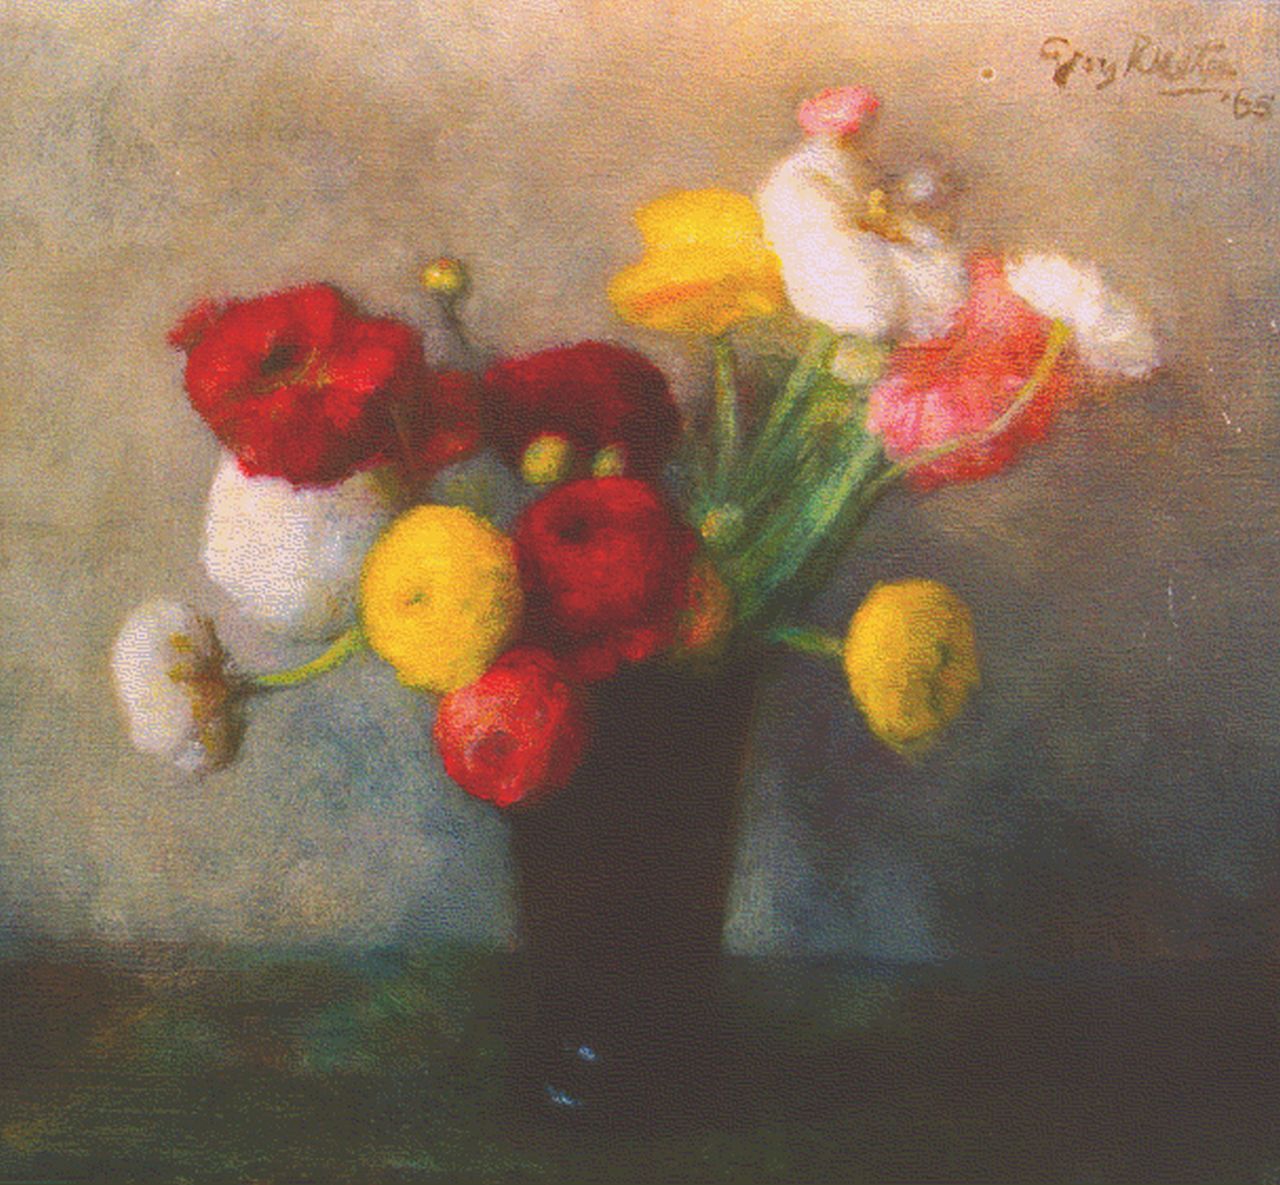 Rueter W.C.G.  | Wilhelm Christian 'Georg' Rueter, Turban buttercups in a vase, oil on canvas 41.3 x 44.0 cm, signed u.r. and dated '65